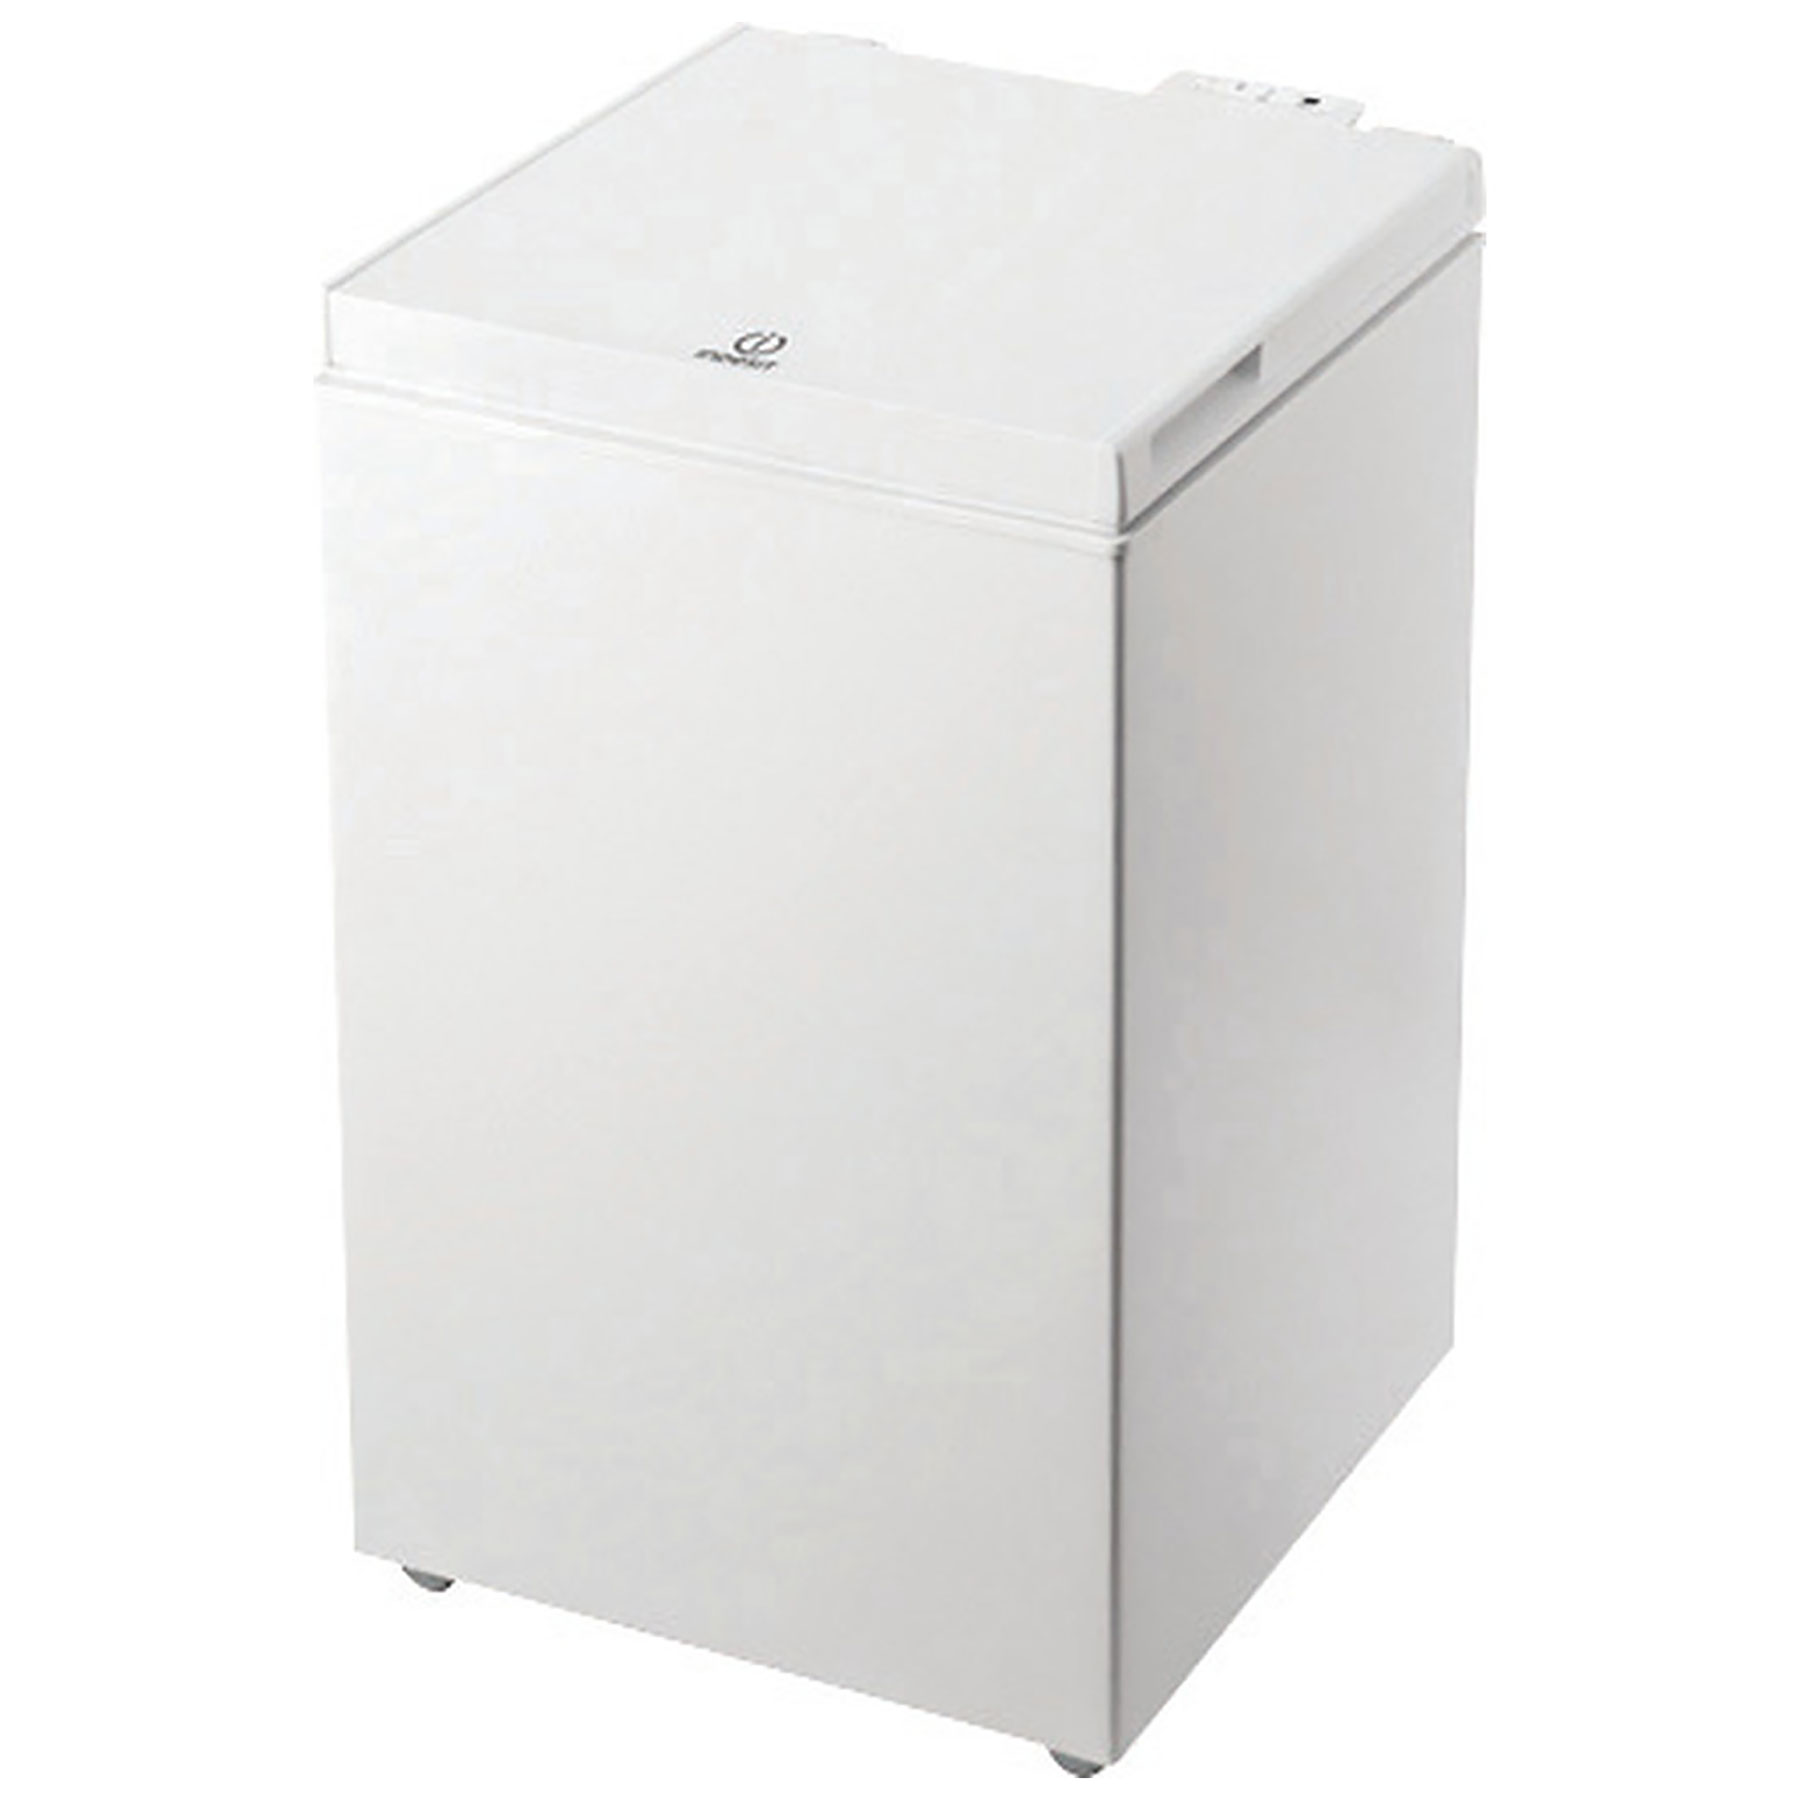 Image of Indesit OS2A10022 53cm Chest Freezer in White 99 Litre 0 86m E Rated